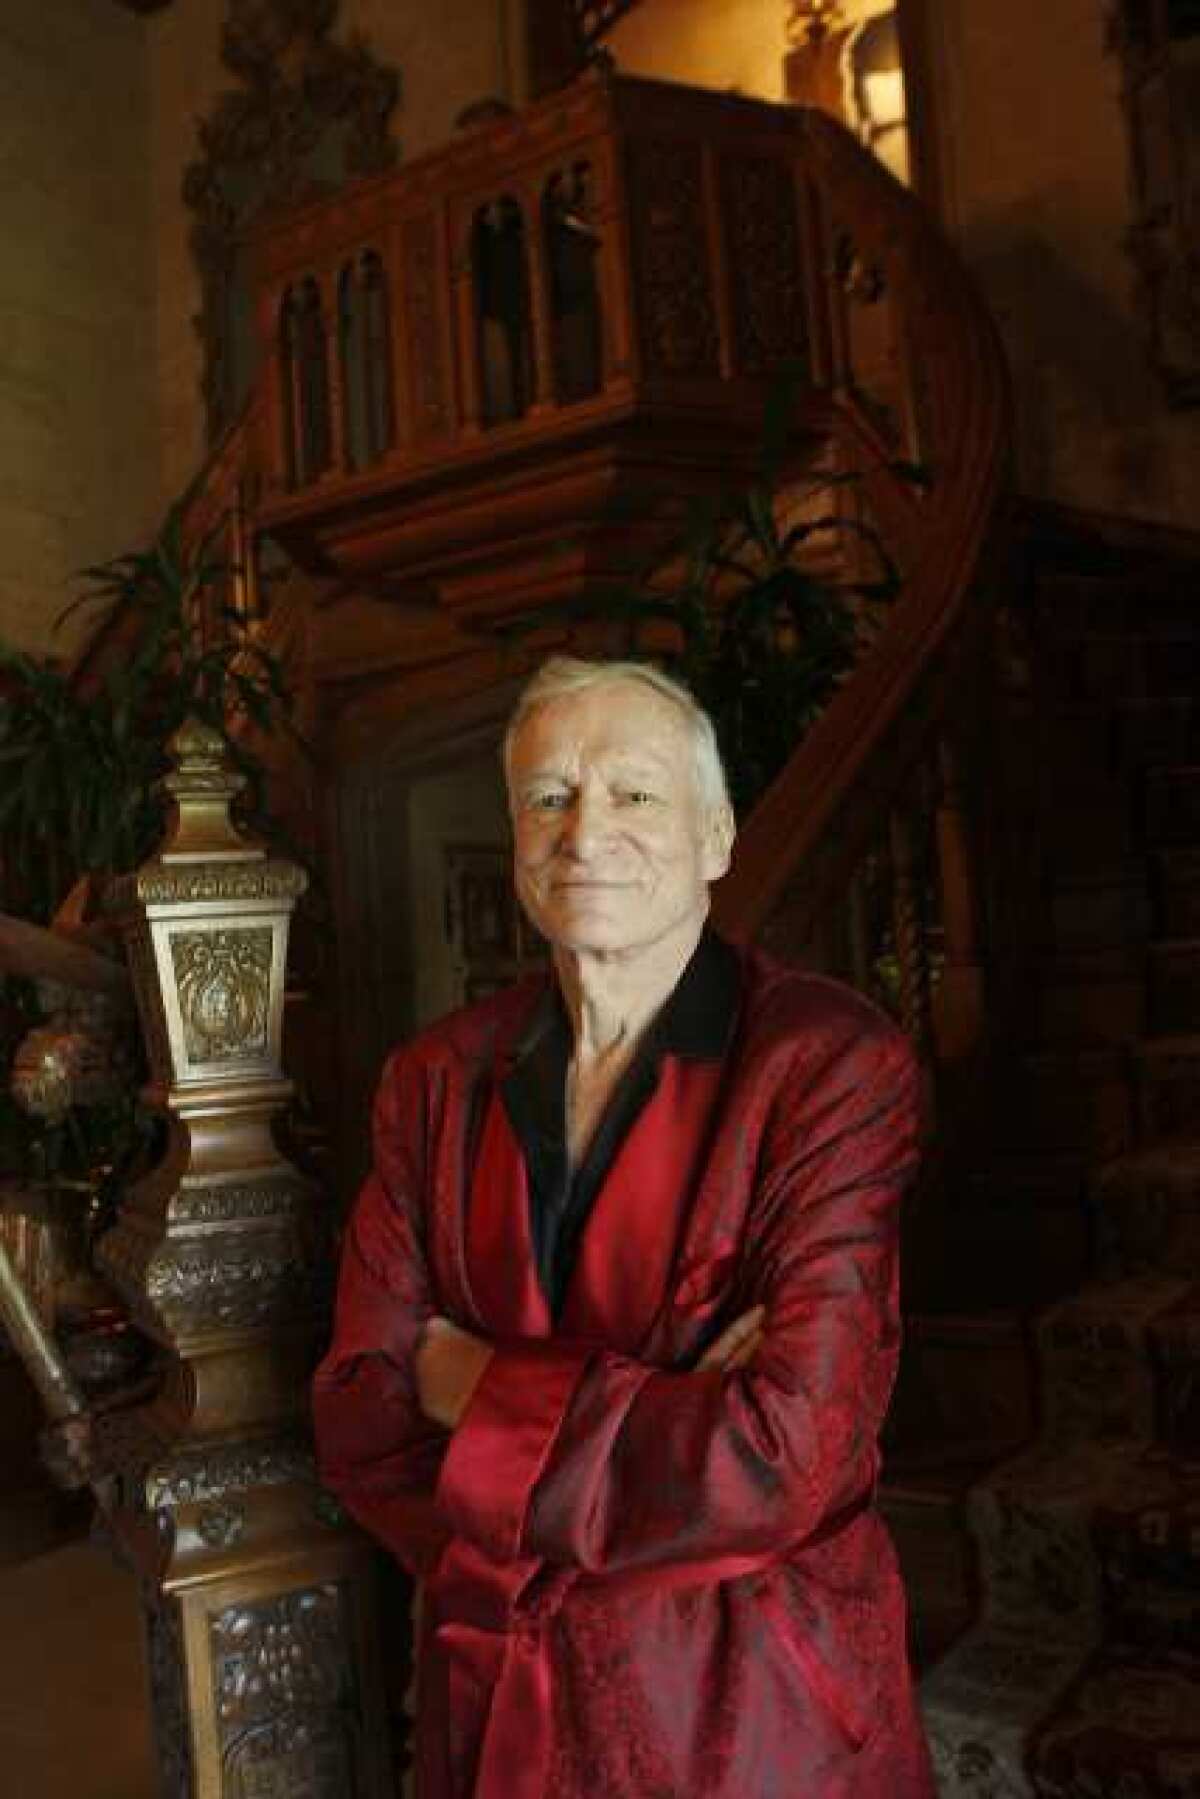 Hugh Hefner standing in a red robe at the foot of a staircase.